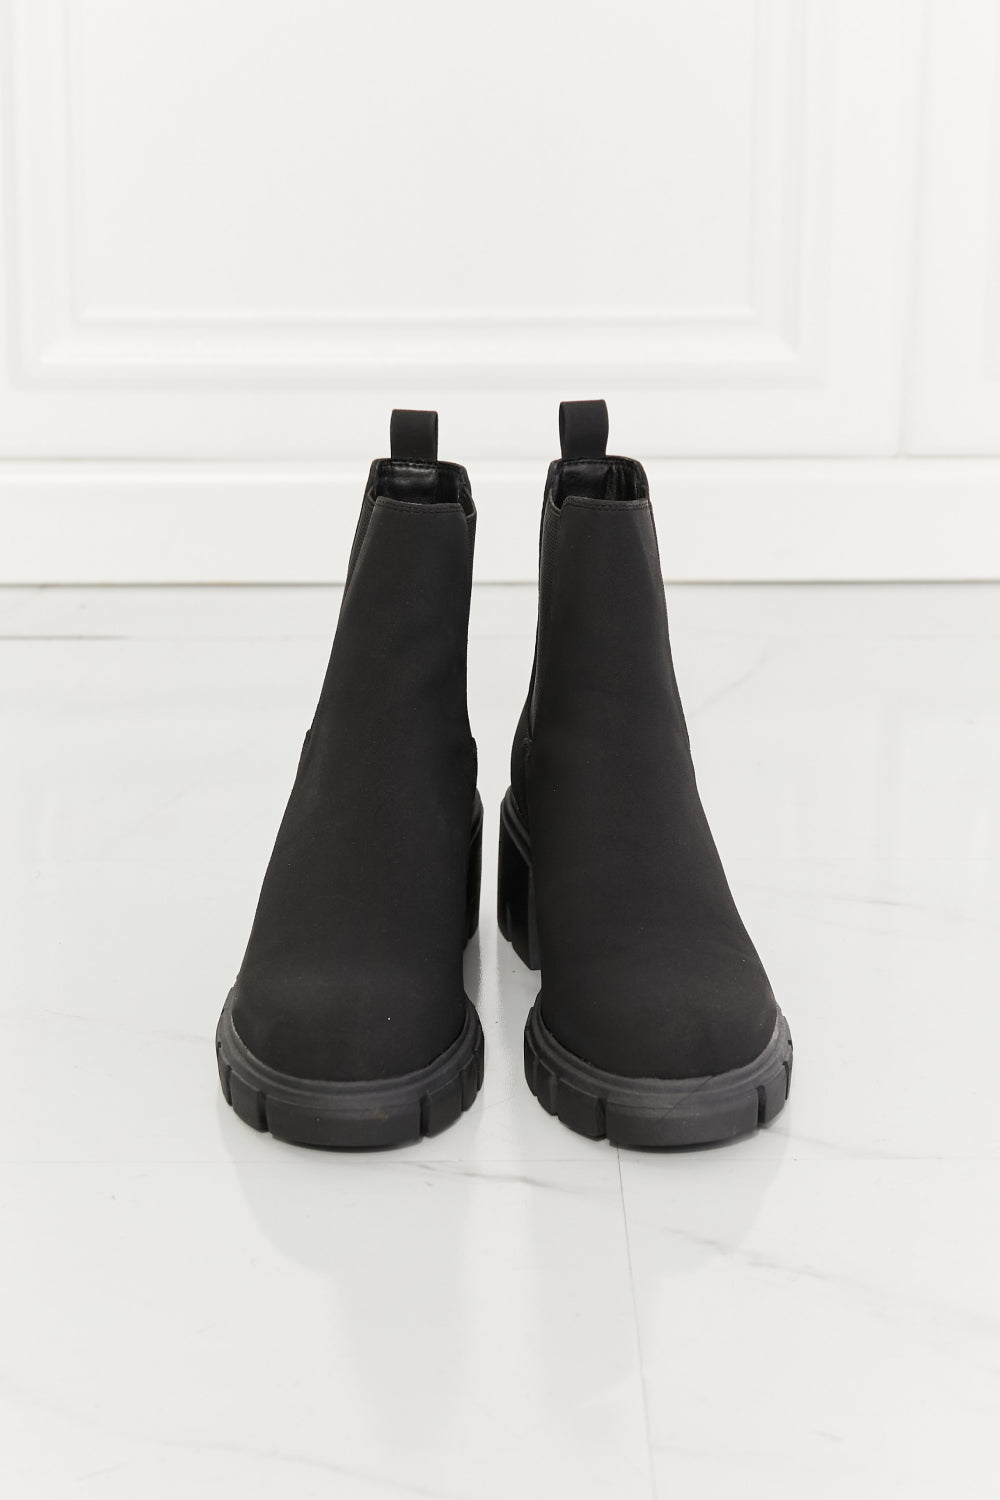 MMShoes Work For It Matte Lug Sole Chelsea Boots in Black - Luv Lush